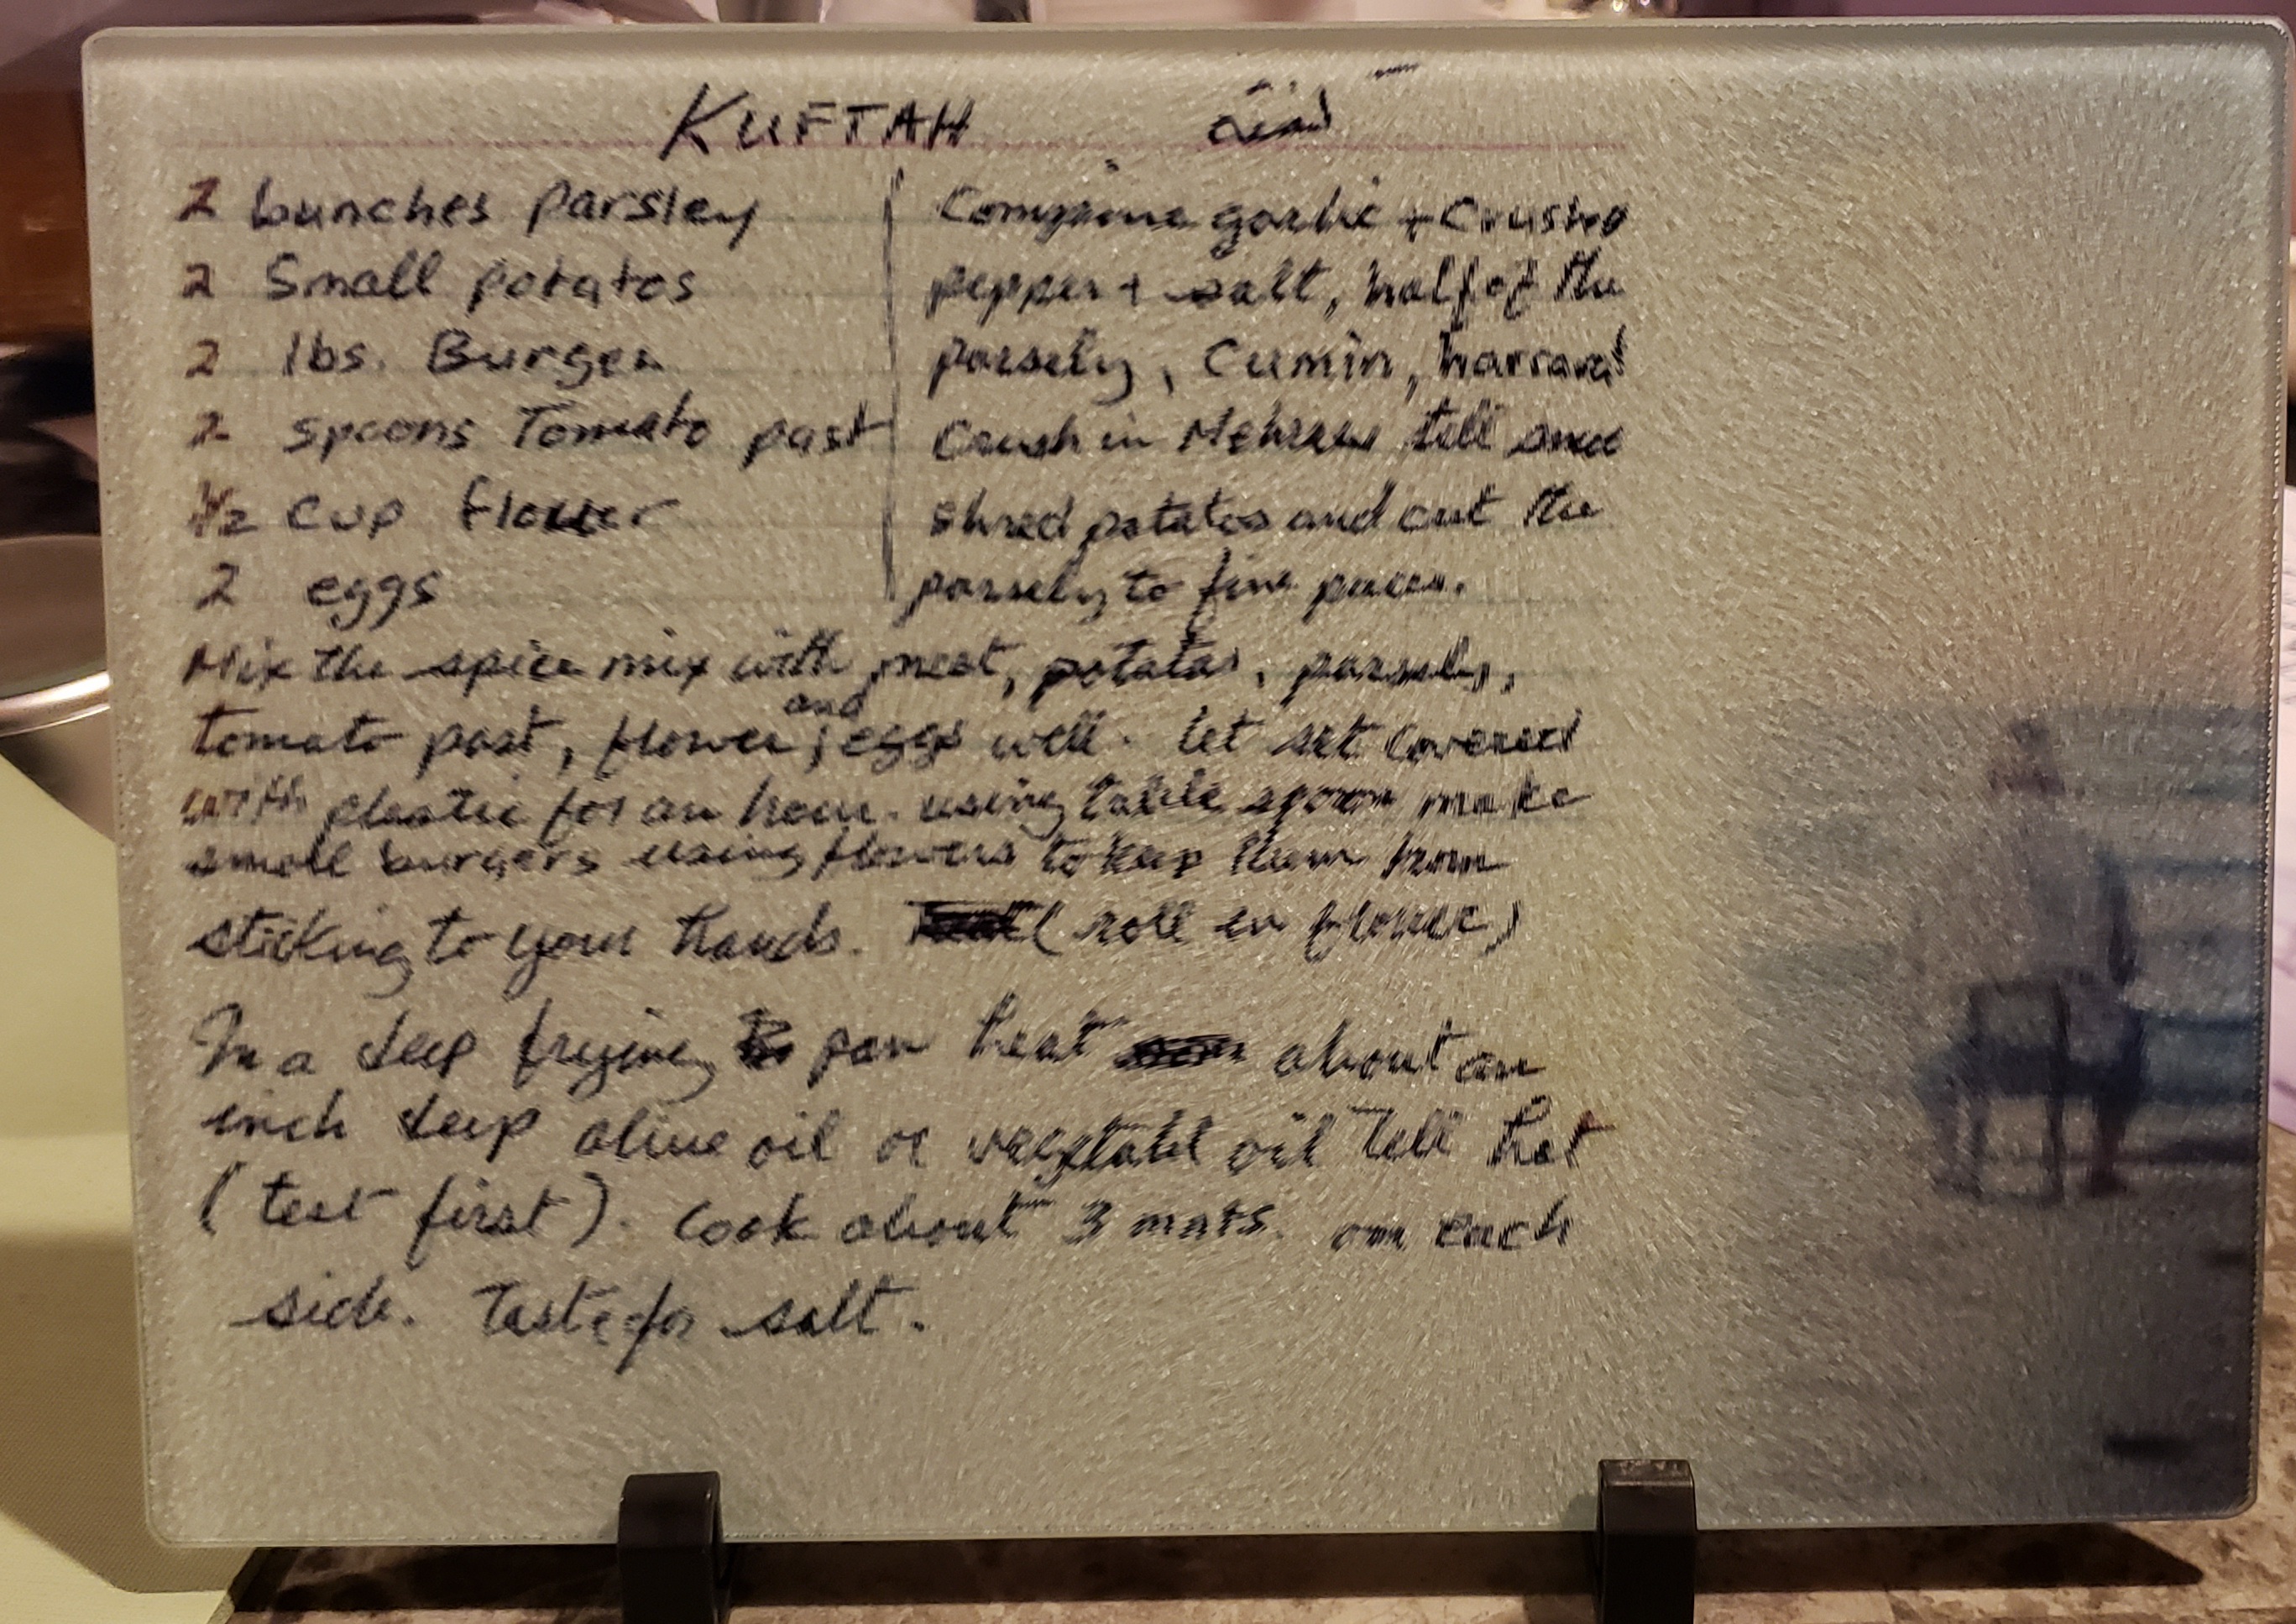 Recipe written by her father who has passed, along with a photo of him.